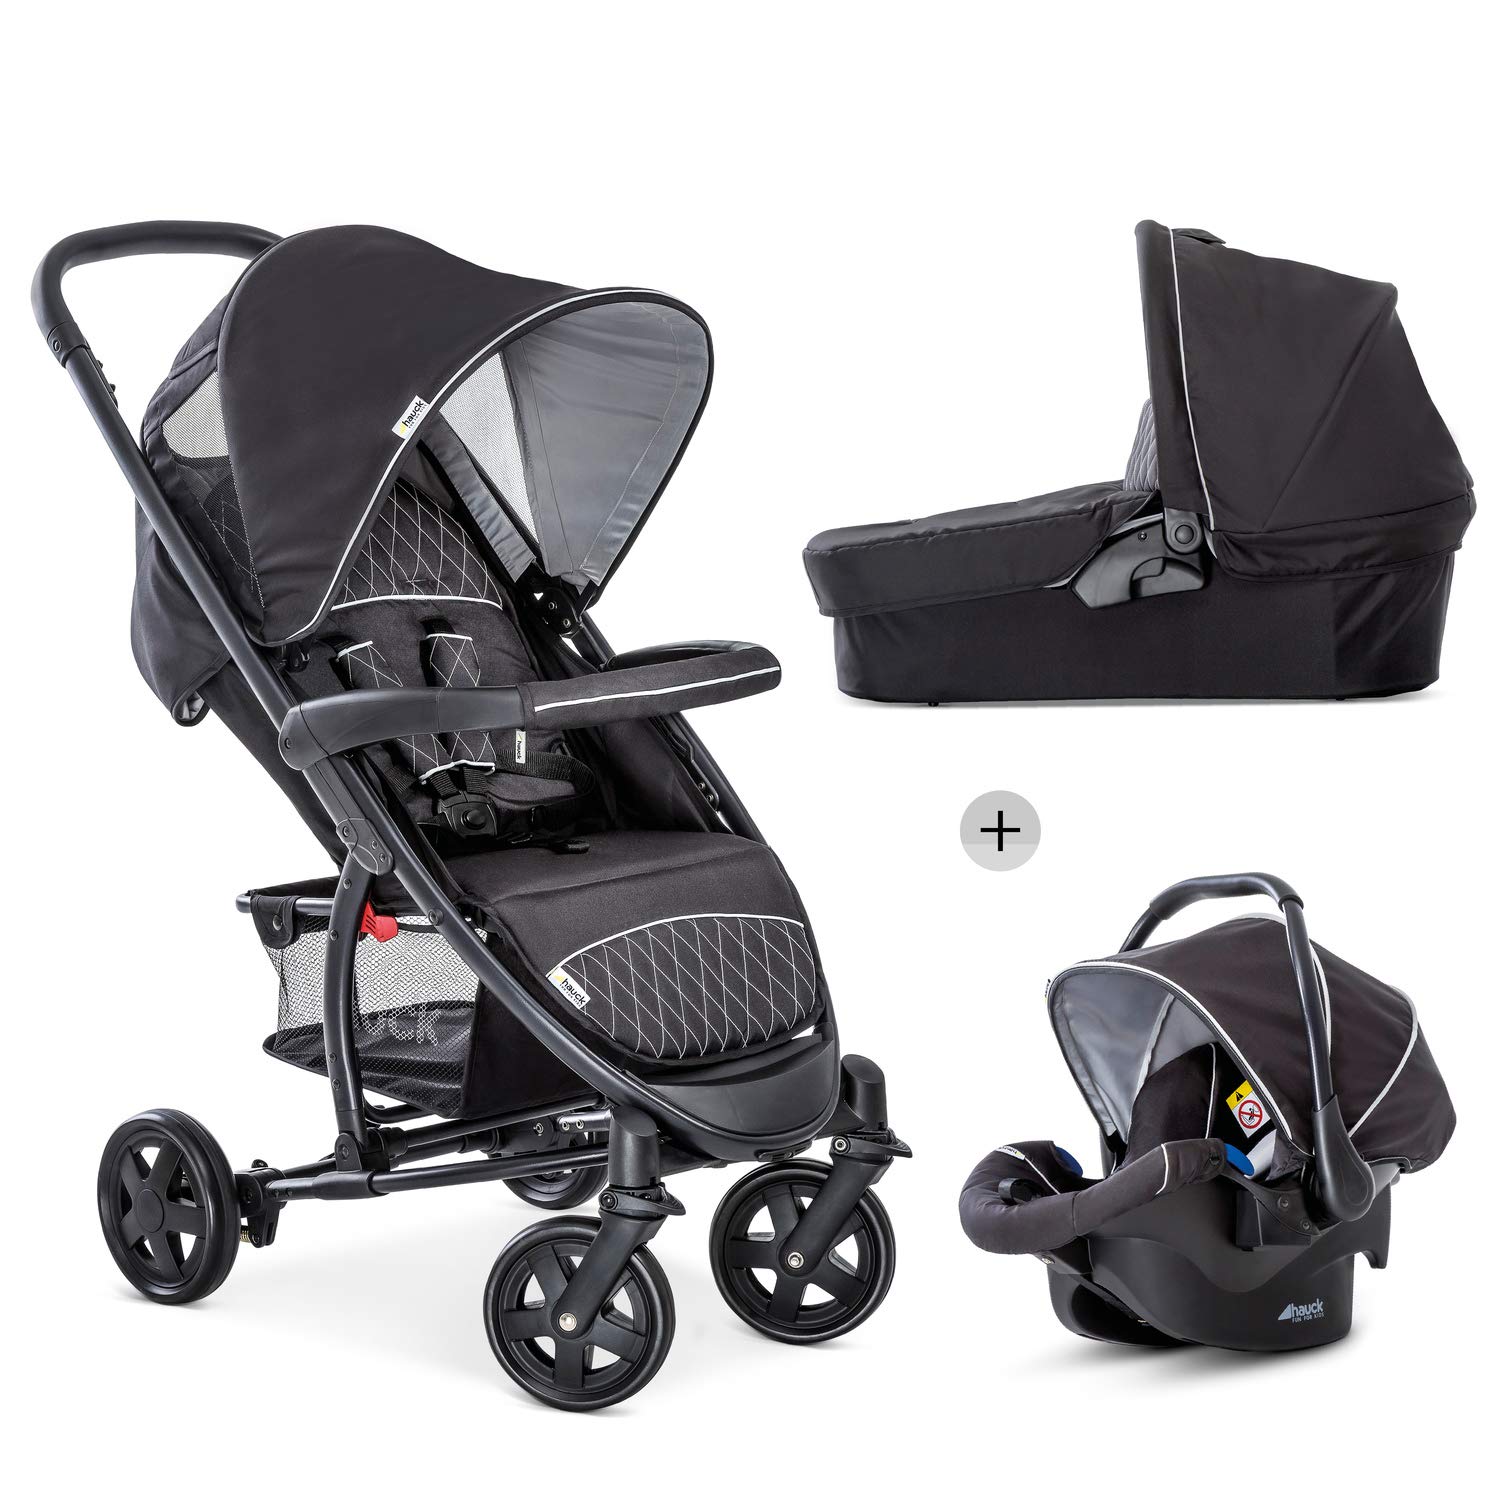 Hauck Hauck Malibu 4 trio set 3-in-1 combi pram, up to 18 kg baby seat sports buggy with lying position, from birth, light, small, foldable Black/silver